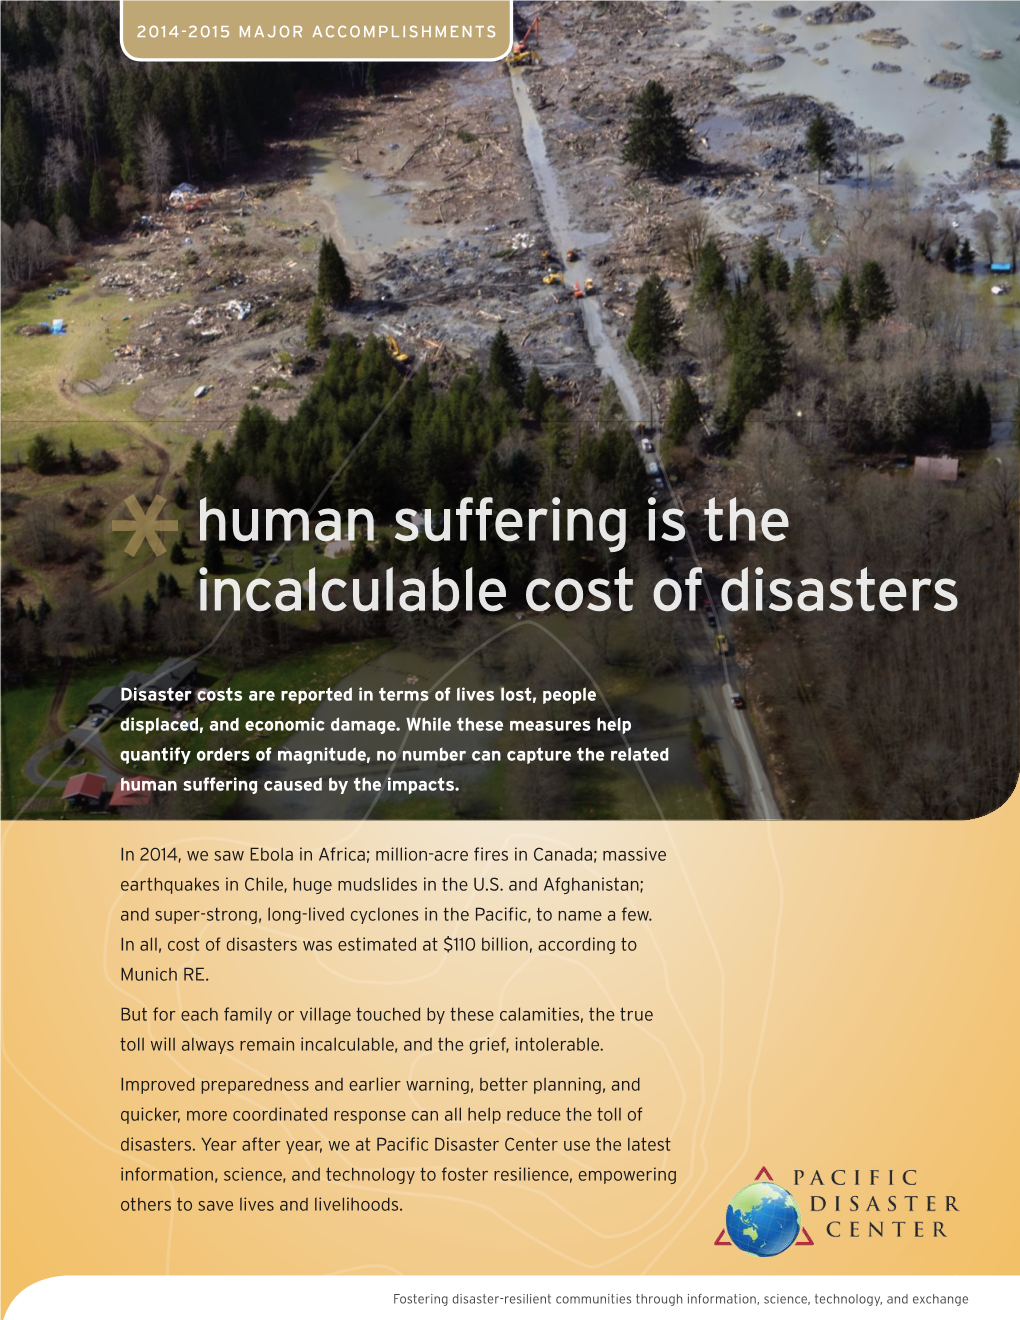 Human Suffering Is the Incalculable Cost of Disasters